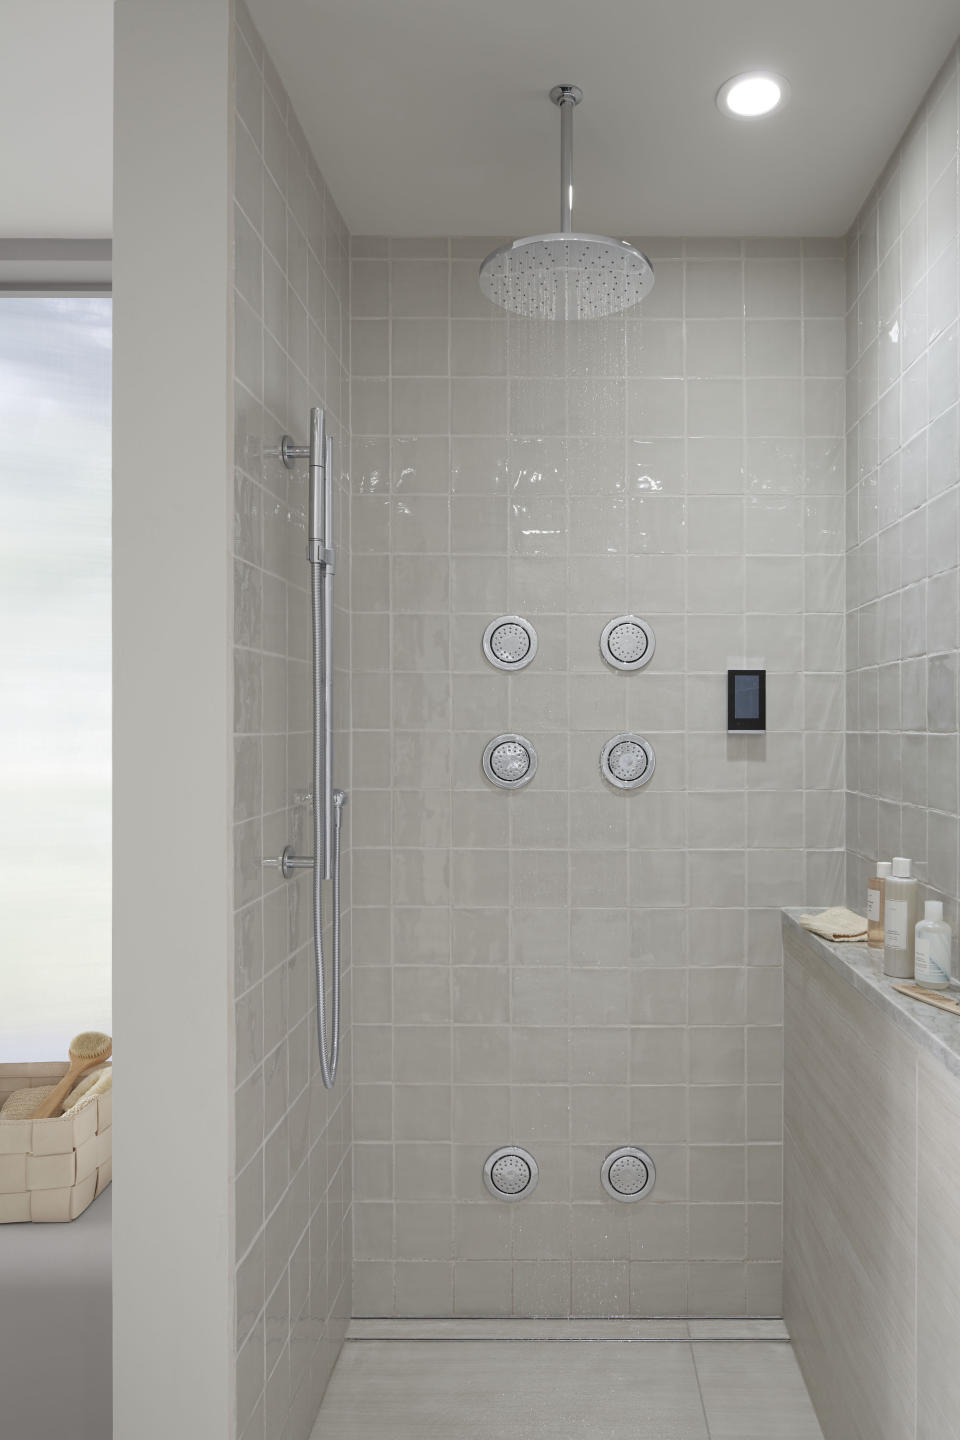 This photo provided by Kohler Co. shows Kohler's DTV+ system. The system brings water, steam, sound and light to the bath for a multi-sensory shower experience that incorporates a touchscreen interface and six user preset options to customize all four elements. (Kohler Co. via AP)